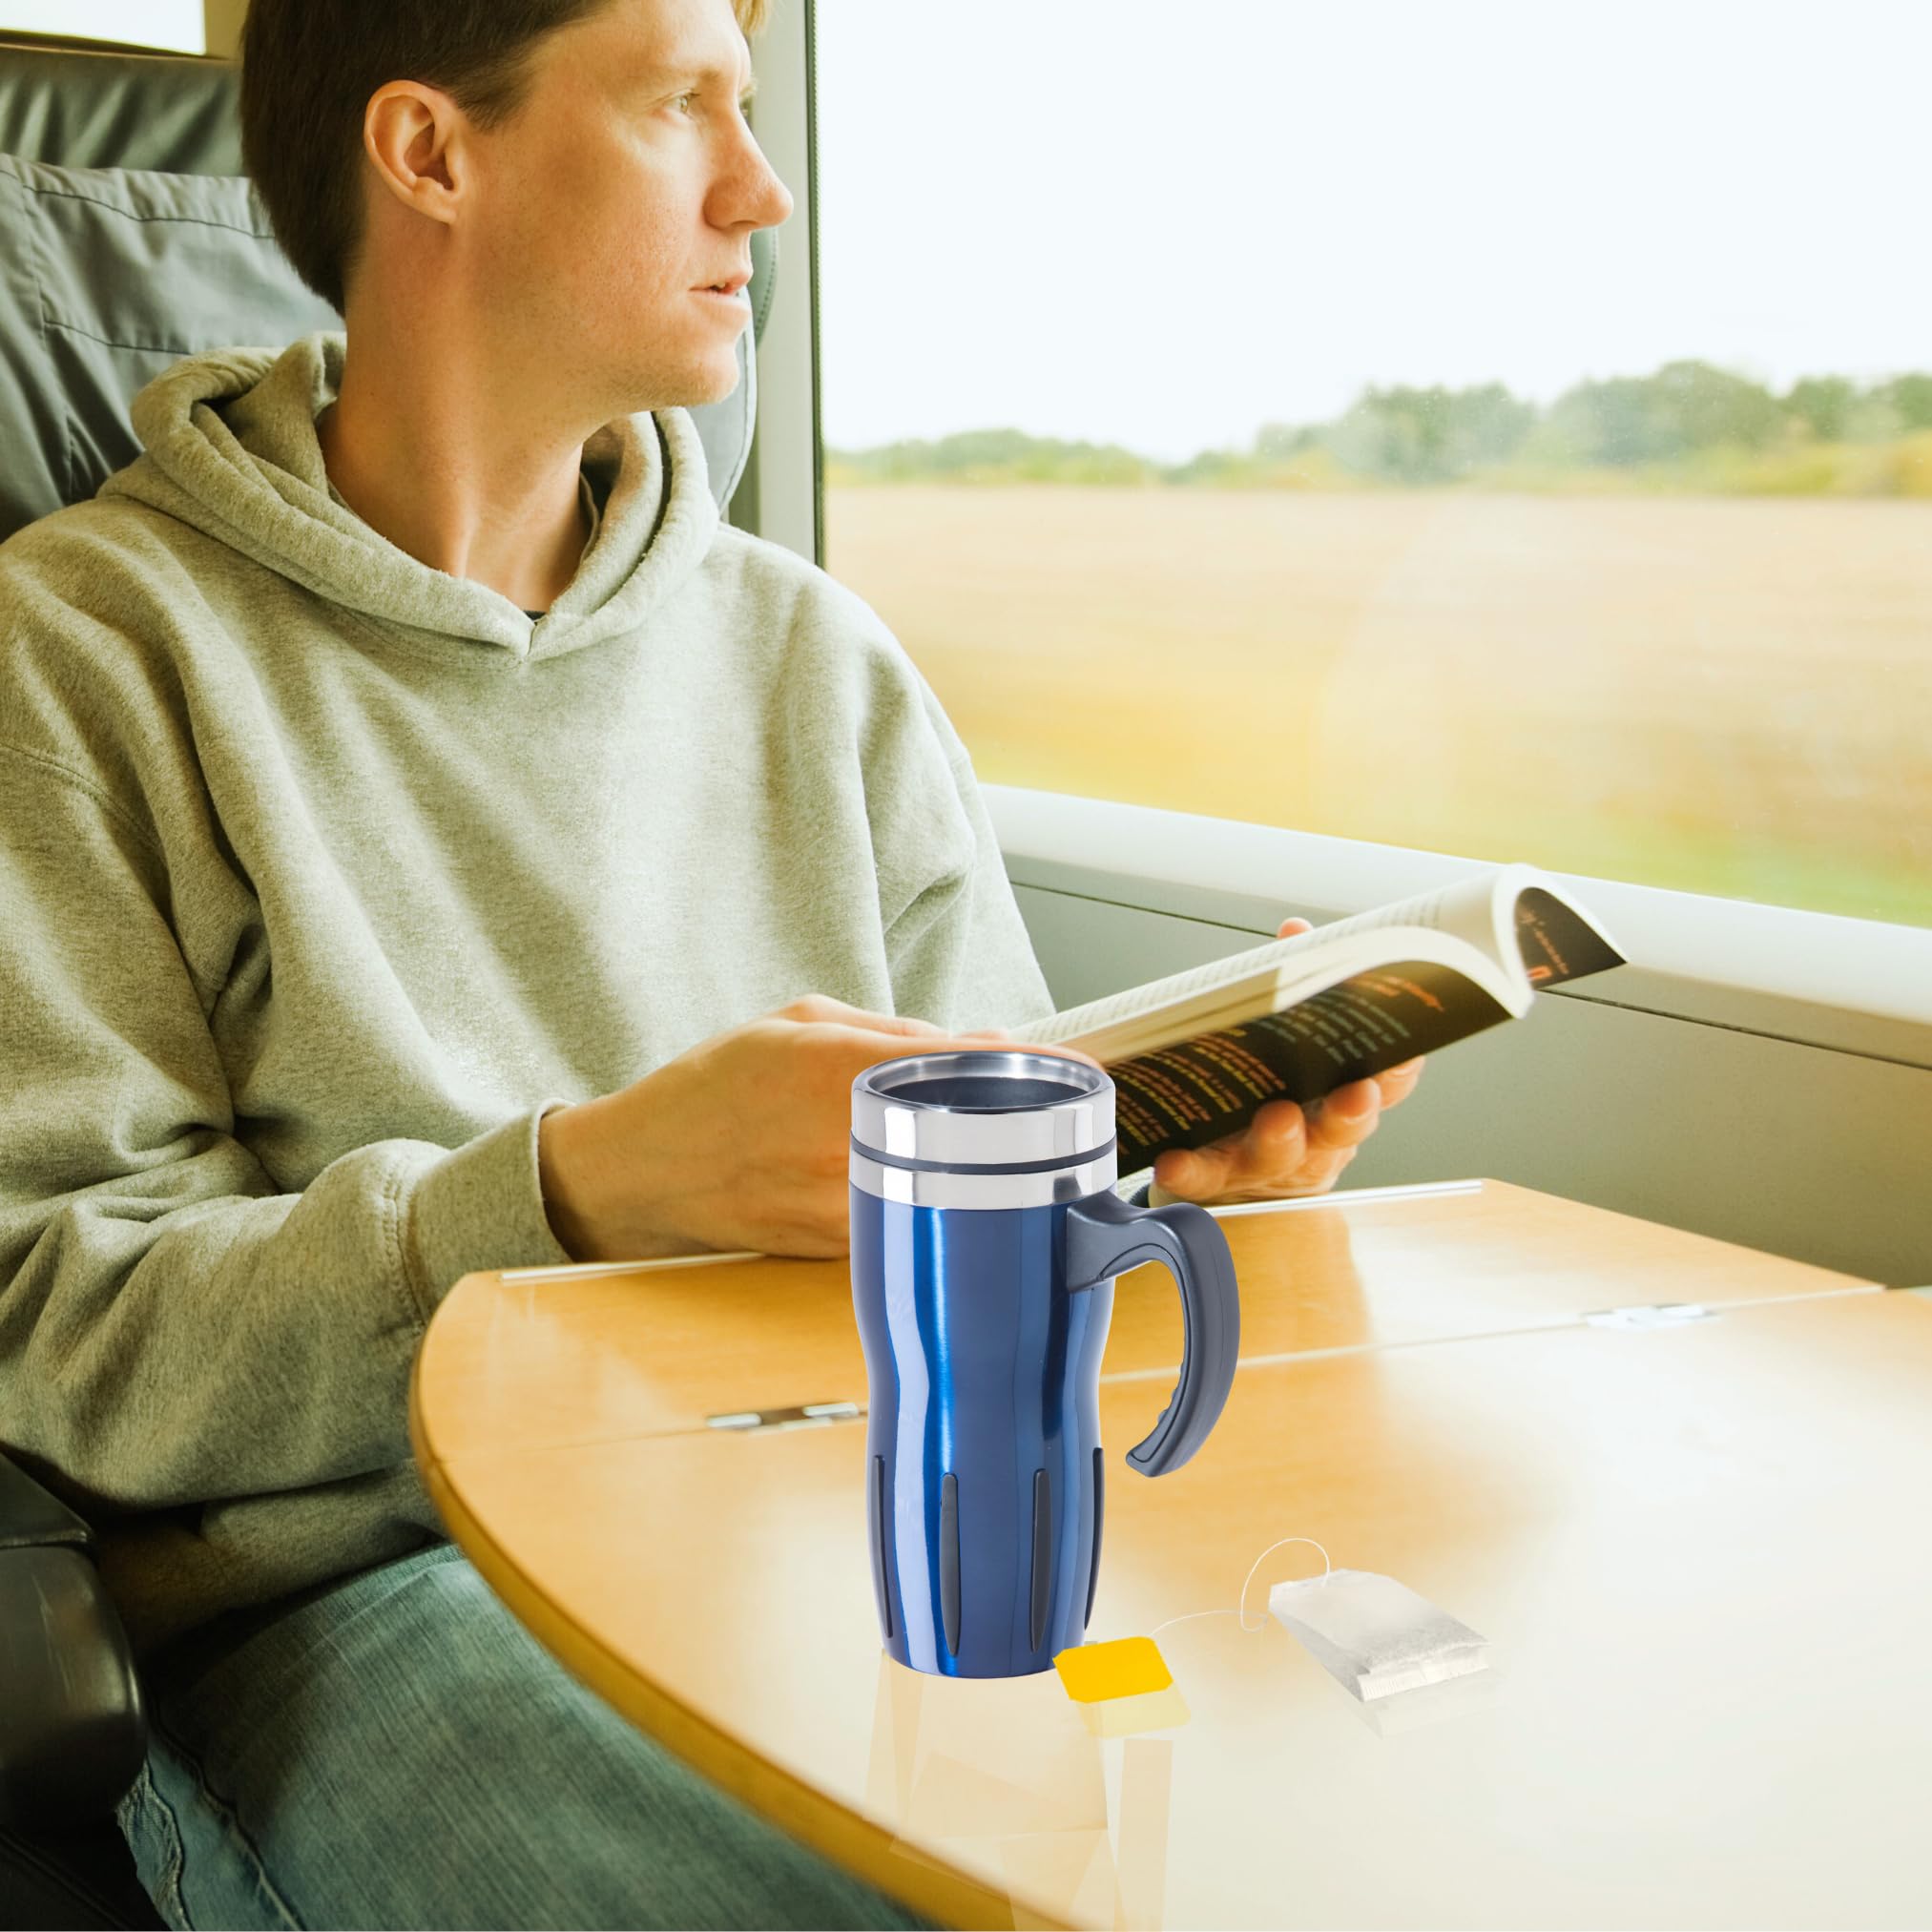 Oggi Multigrip Stainless Steel Thermal Travel Mug - Midnight Blue, 16oz, with slide open lid for hot and cold beverages.